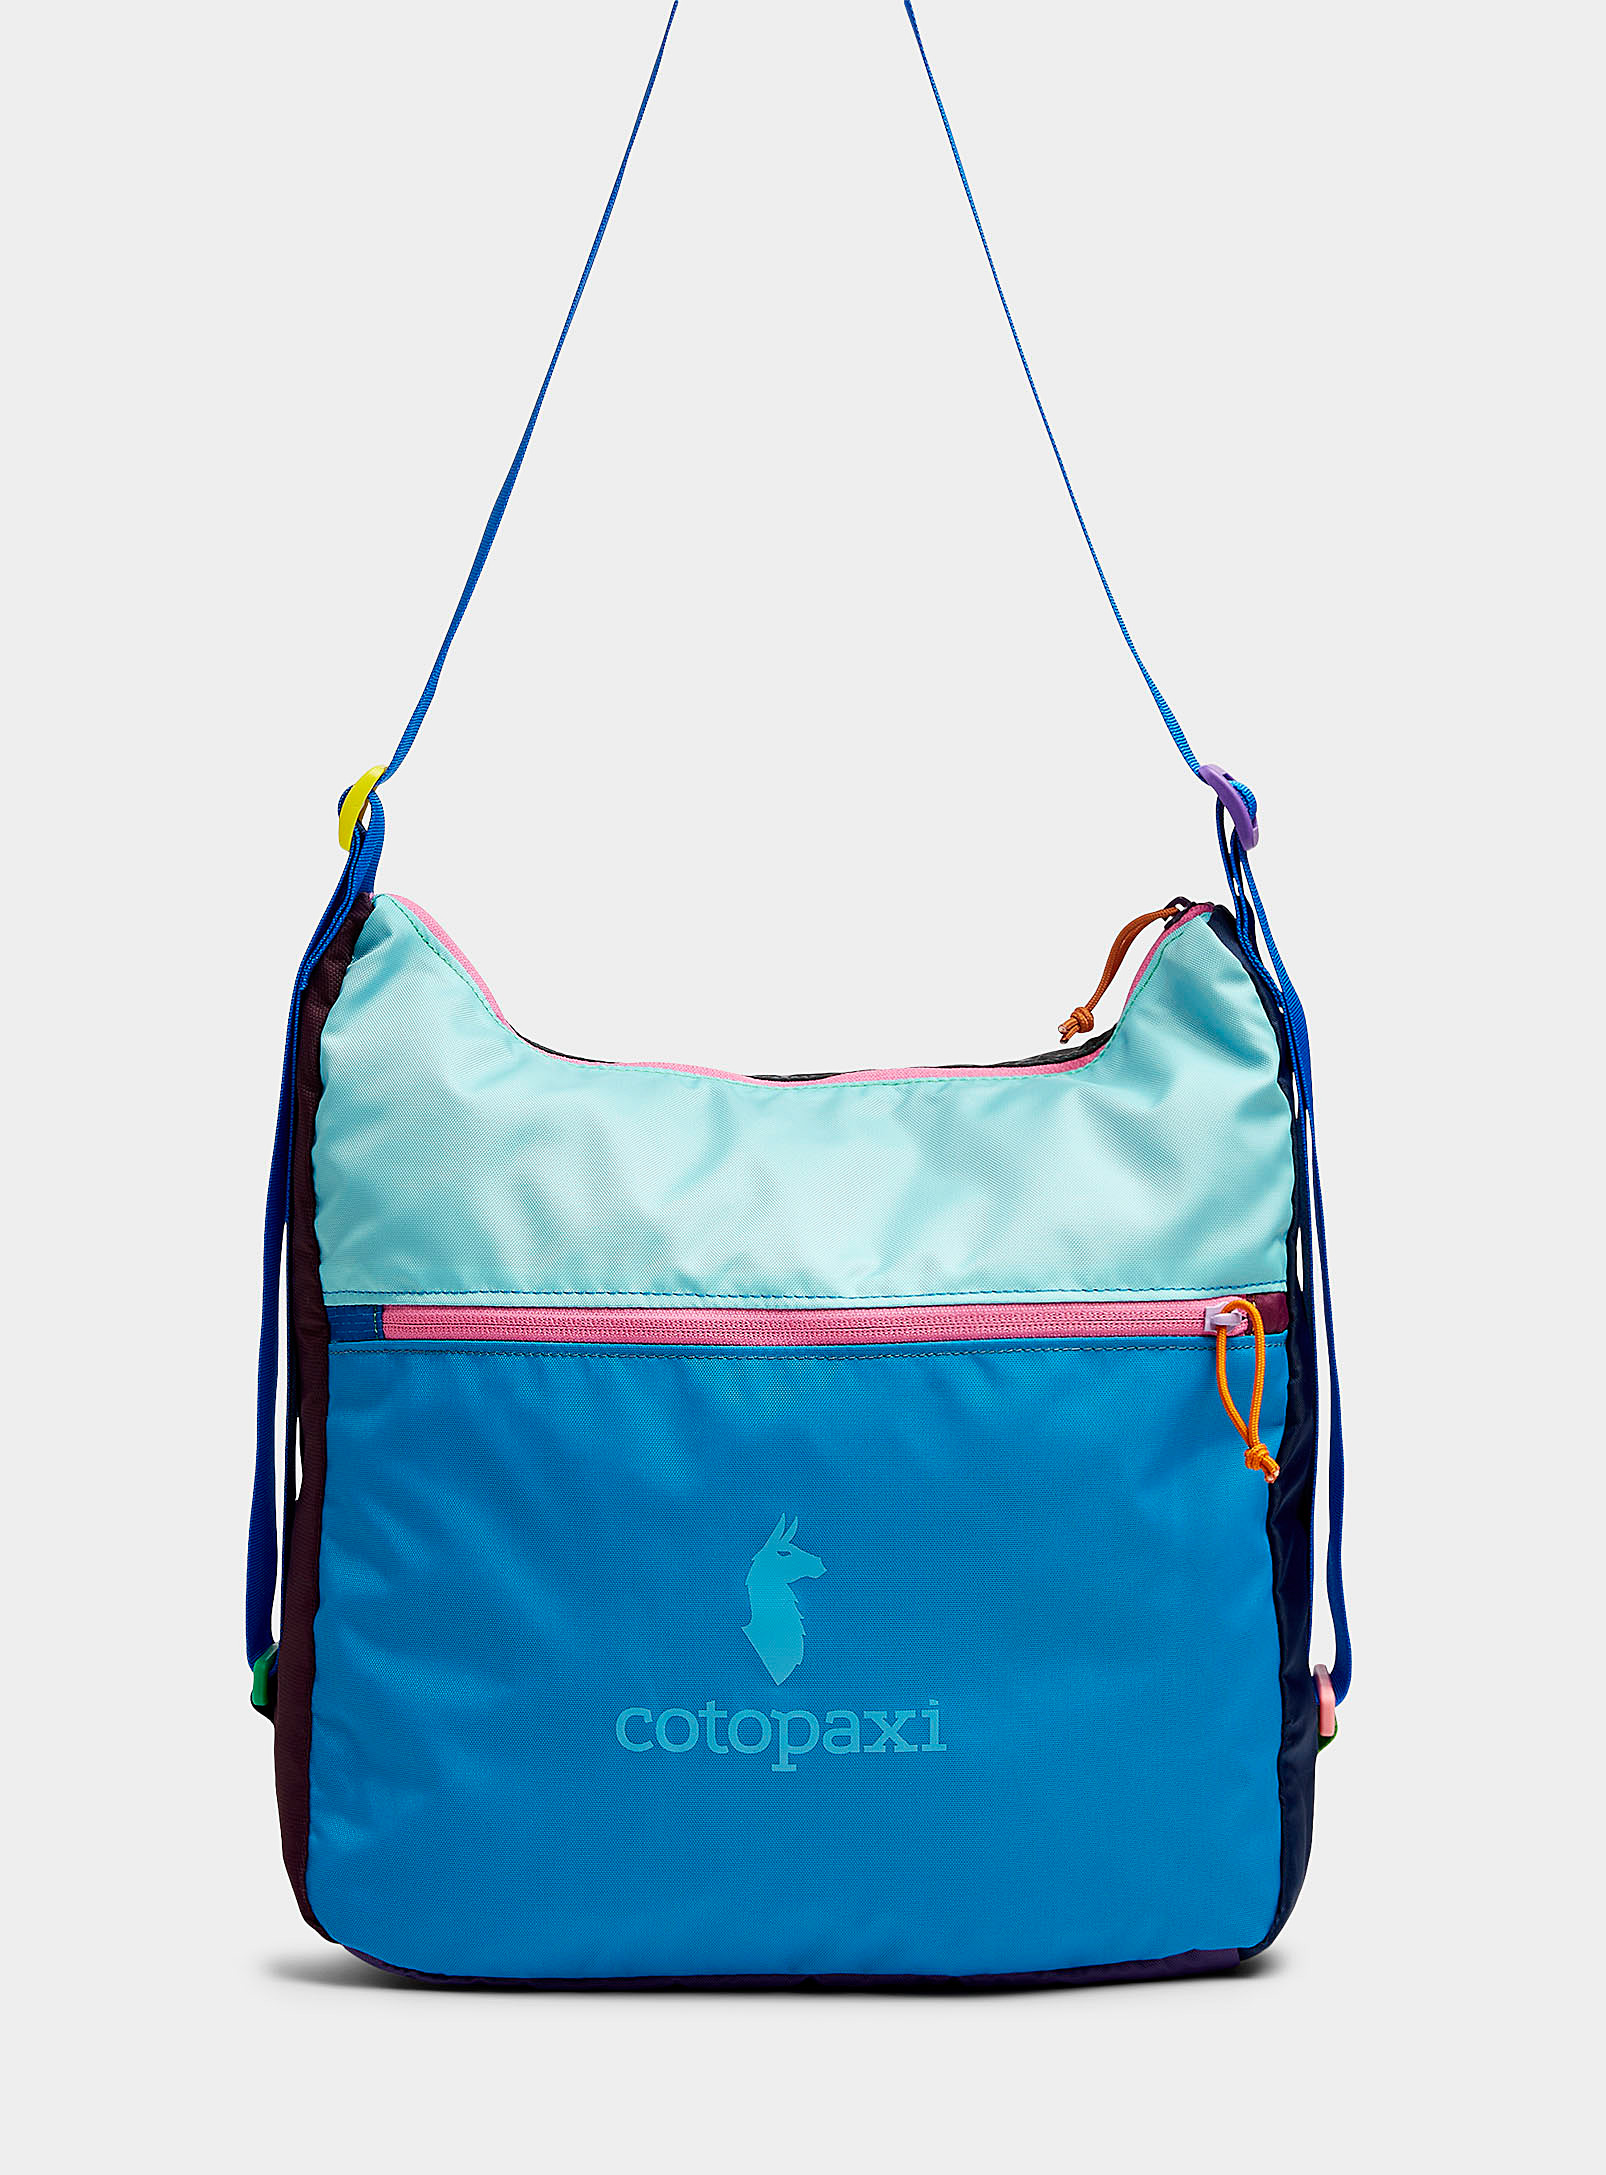 Cotopaxi's Taal Convertible Tote has beautifully saturated colors